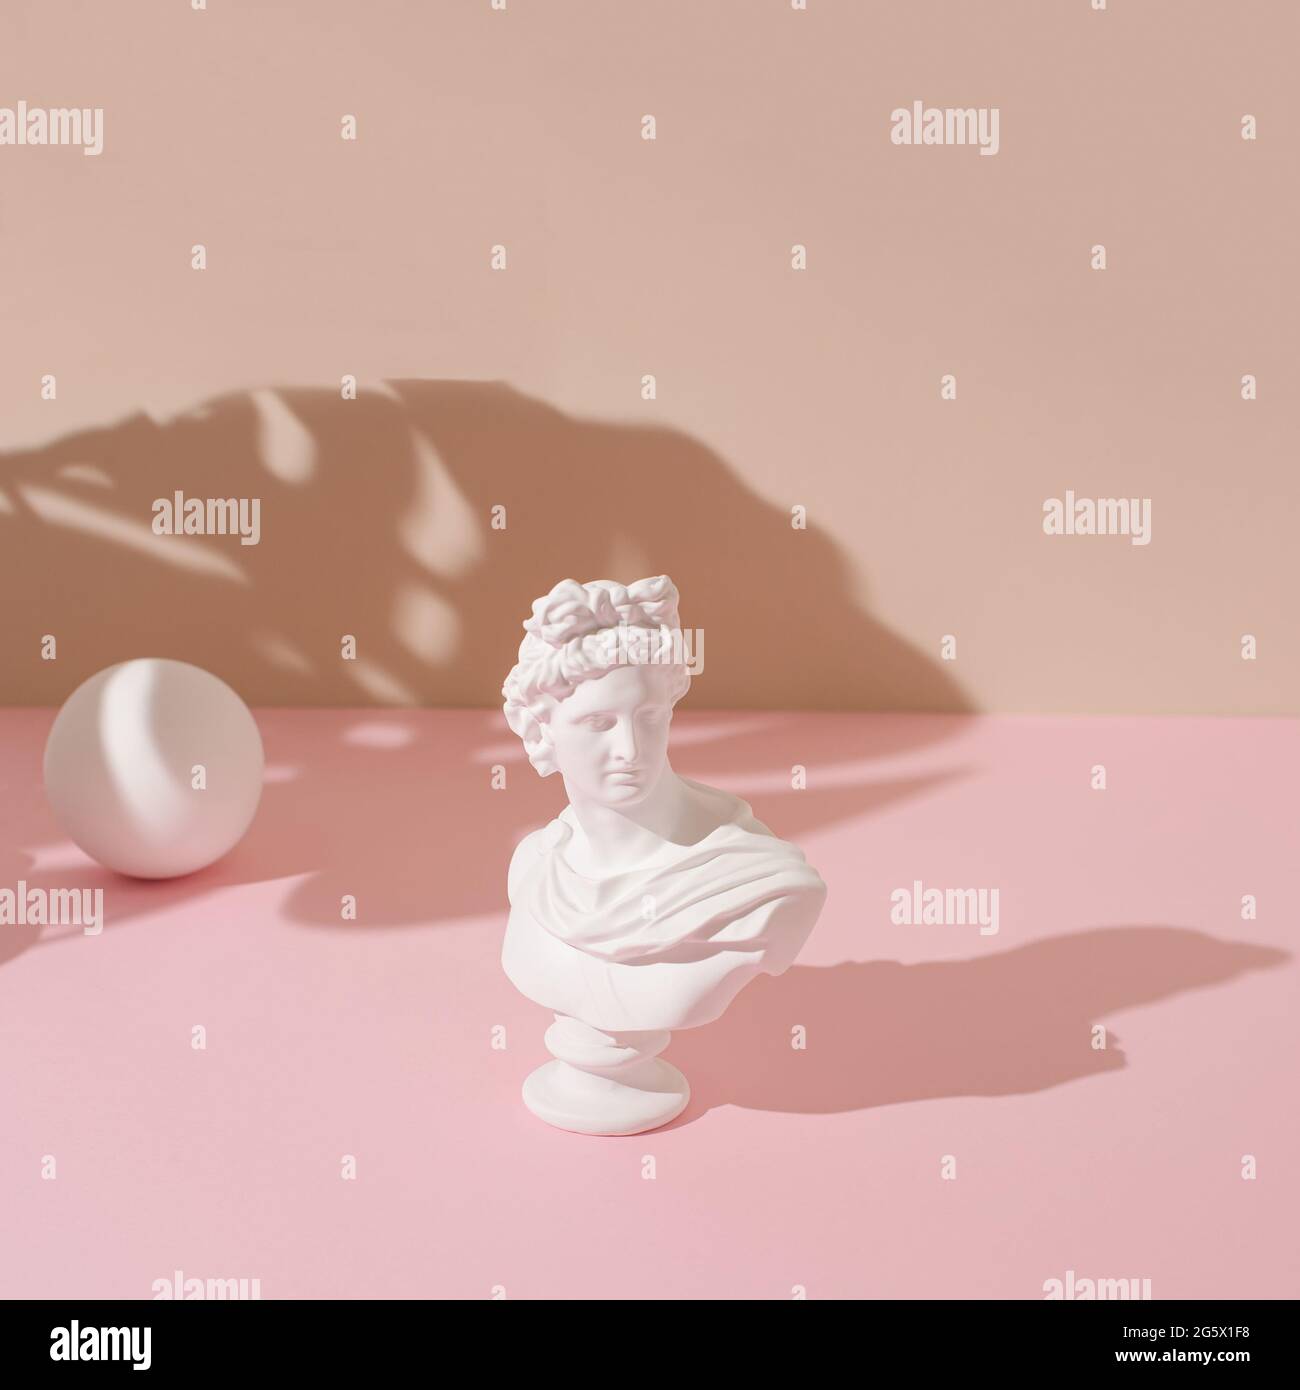 Creative layout with the  sculpture of an antique Apollo and white ball on pastel pink and beige background. Concept art with a minimalist aesthetic. Stock Photo